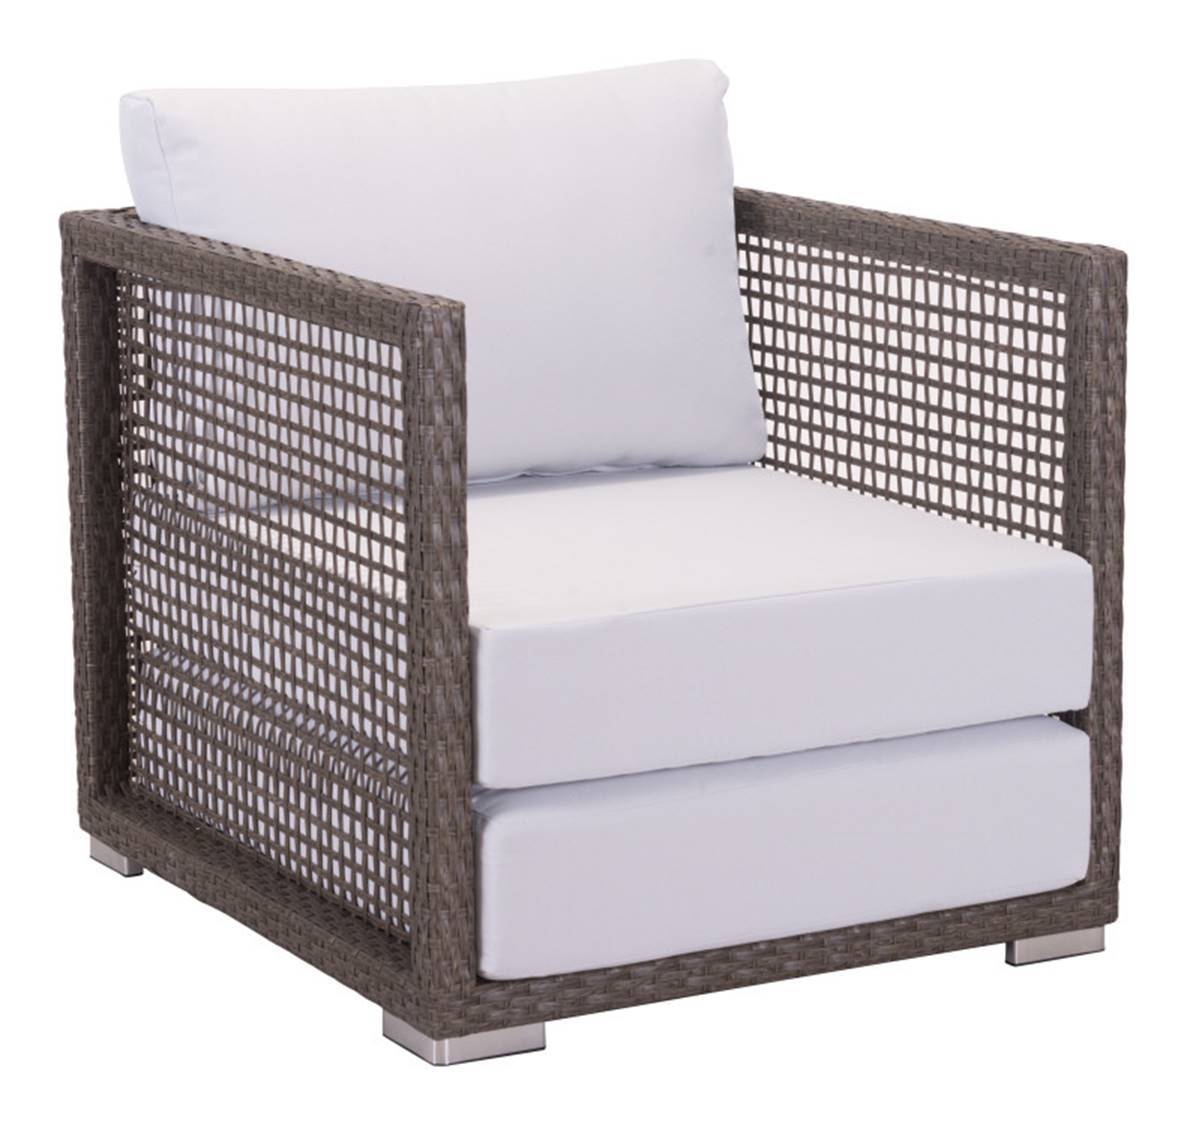 HomeRoots Outdoors Outdoor Chairs Cocoa & Light Gray / Sunproof Fabric, Synethet 26.8" X 31.9" X 30" Cocoa And Light Gray Sunproof Fabric Arm Chair